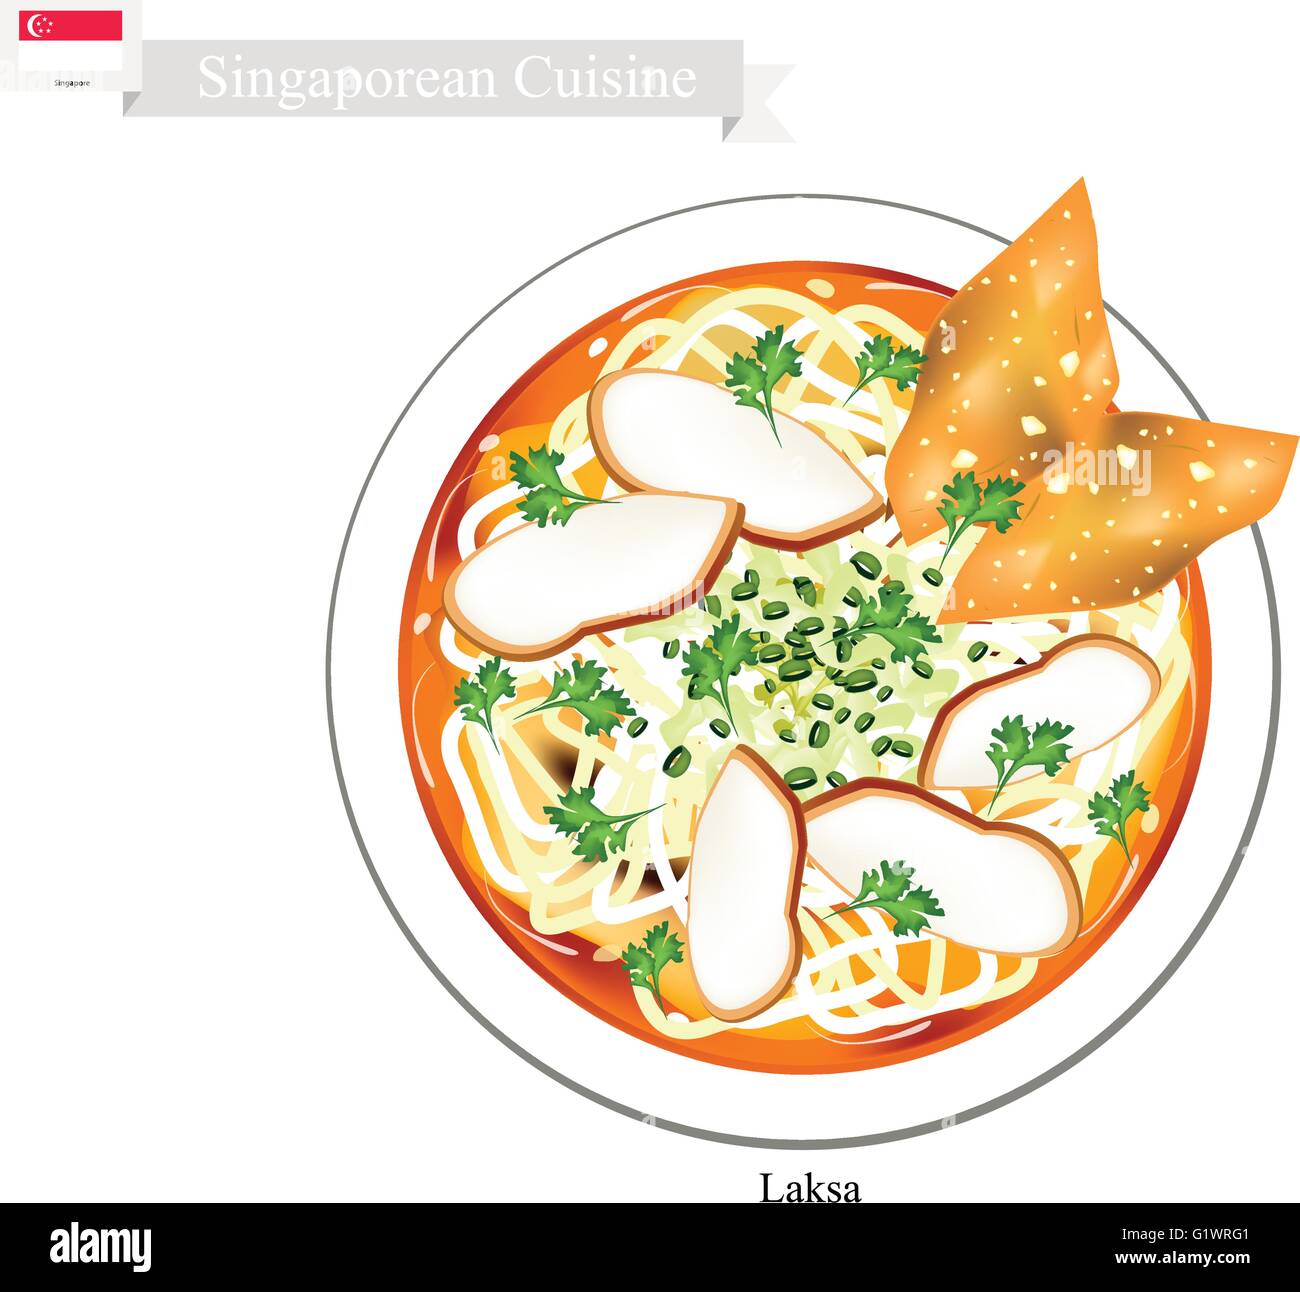 Singaporean Cuisine, Laksa or Traditional Rice Noodle with Meat Ball and Dumpling Served in Spicy Soup. One of The Most Popular Stock Vector